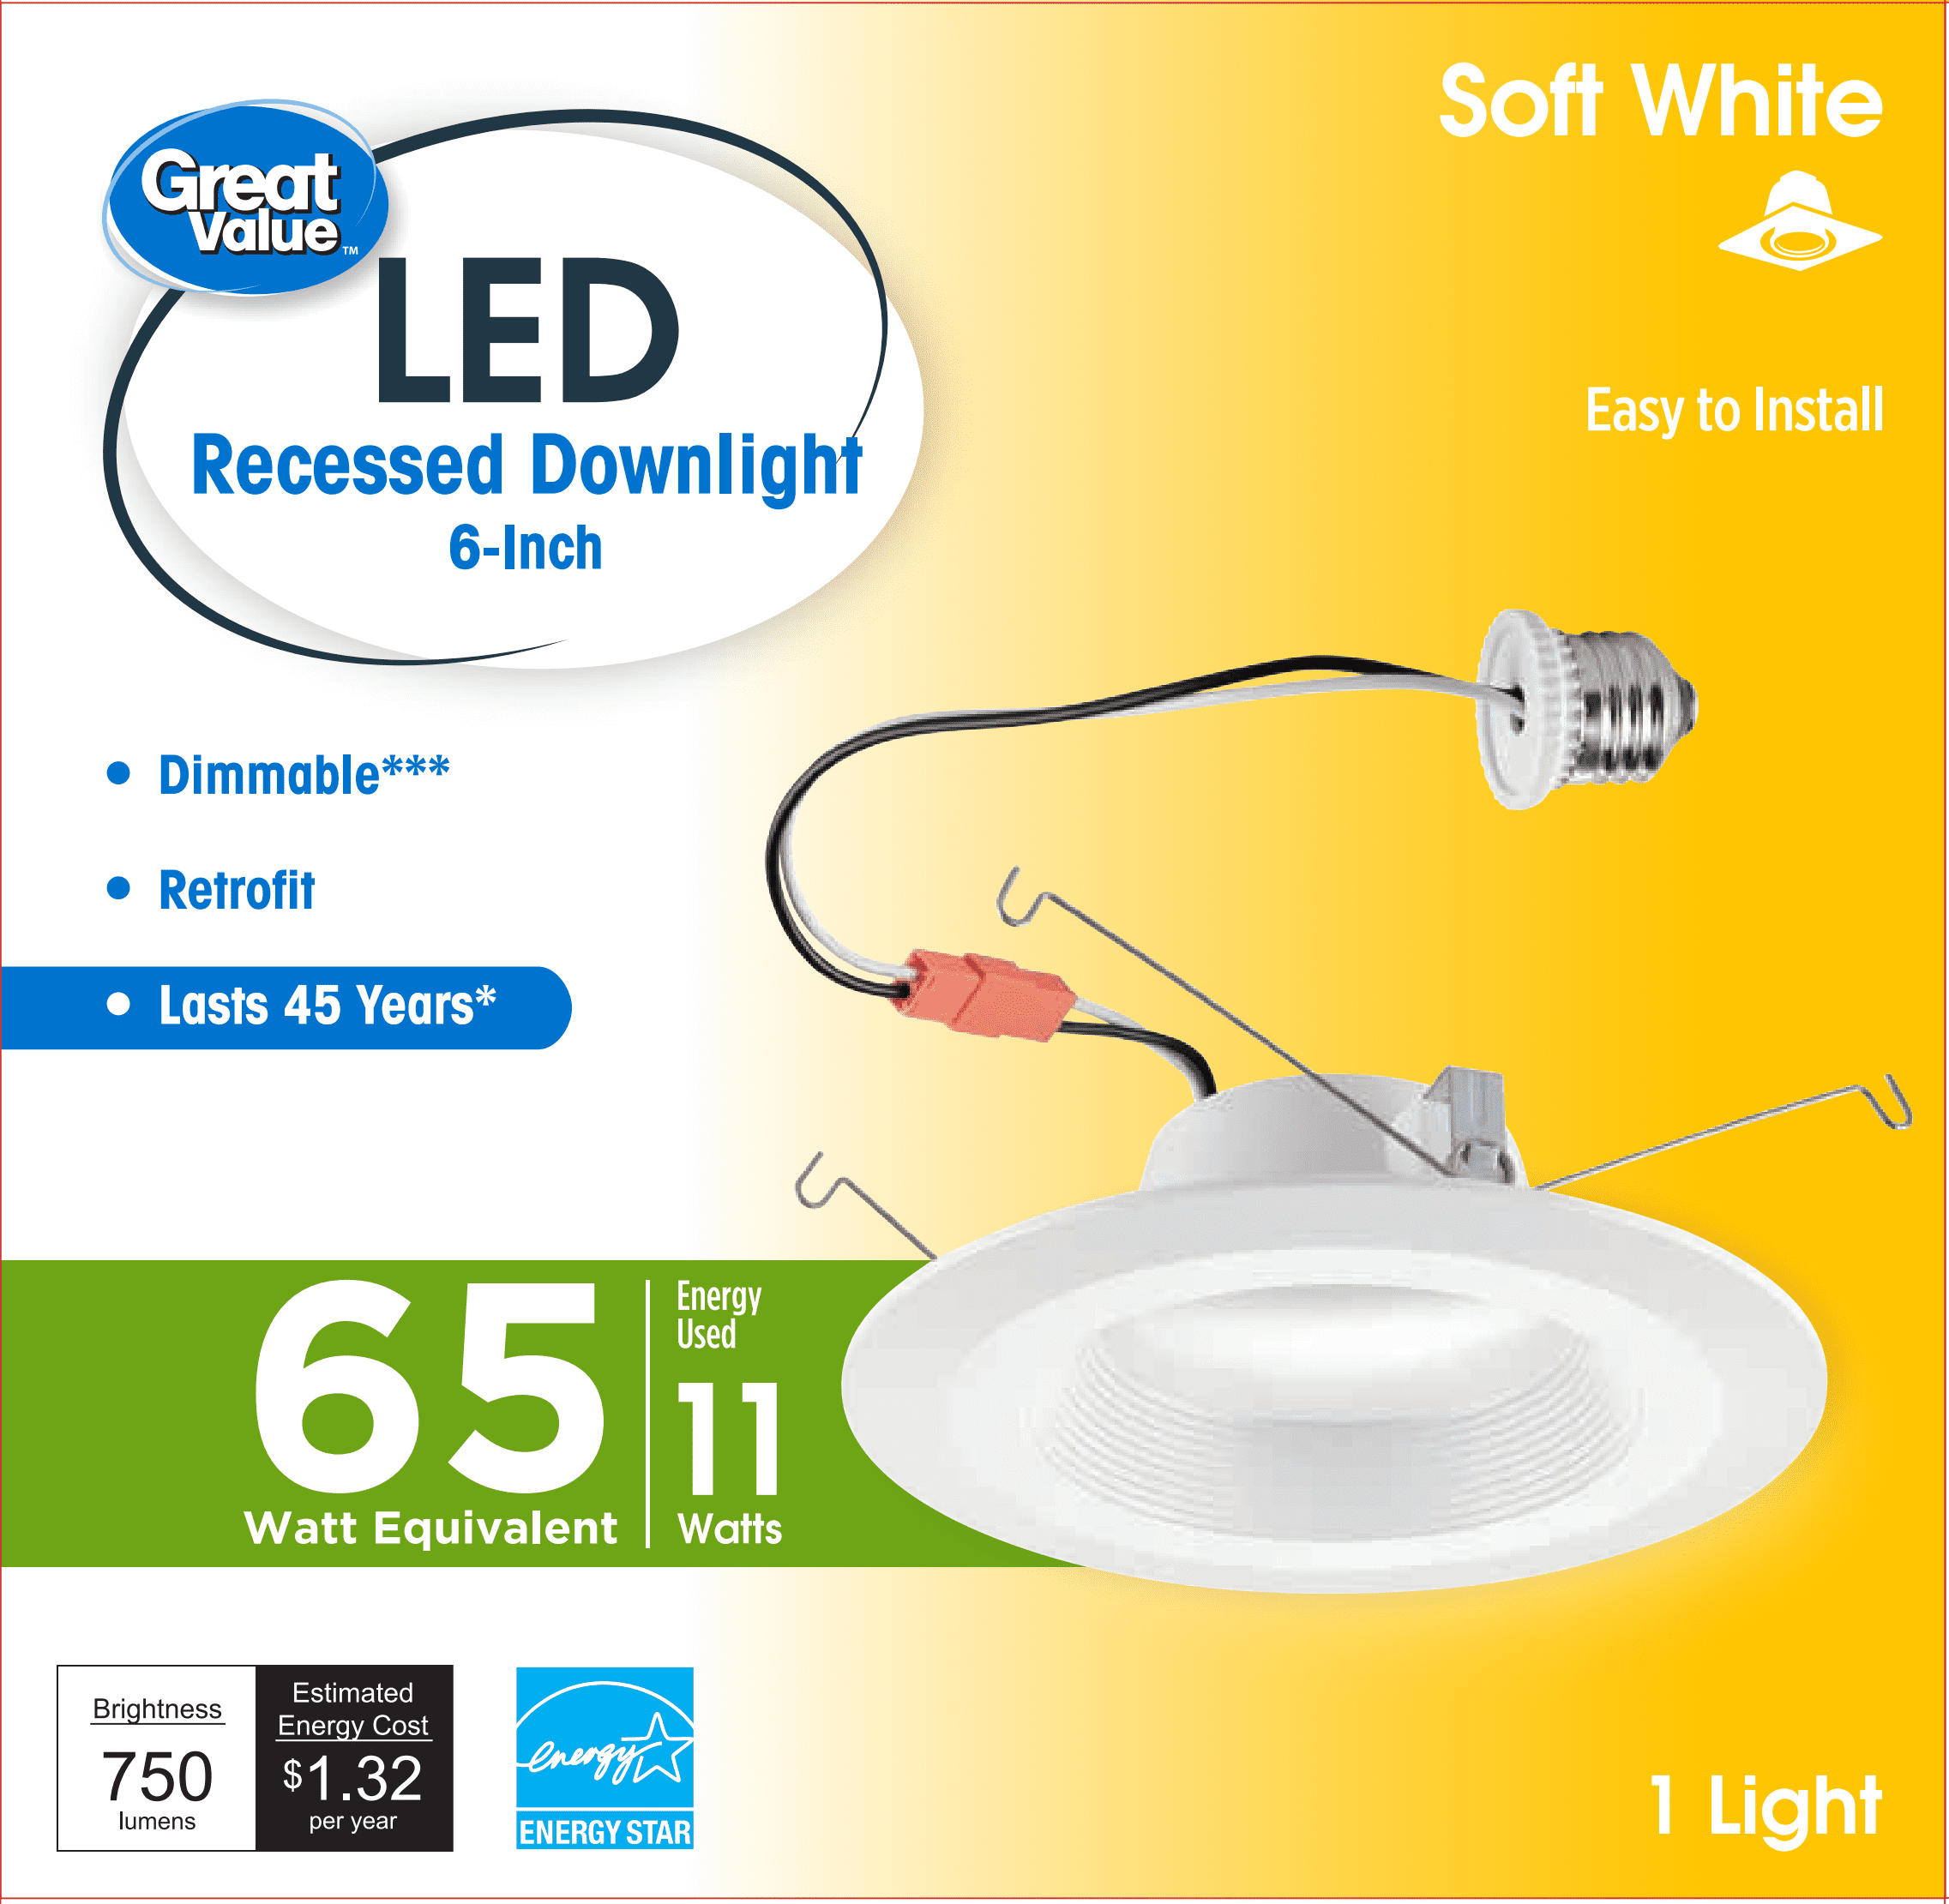 Great Value 65-Watt Equivalent Recessed Can Retrofit Down Light, fit for 5-in or 6-in cans, Soft White, White Finish, 1 Light